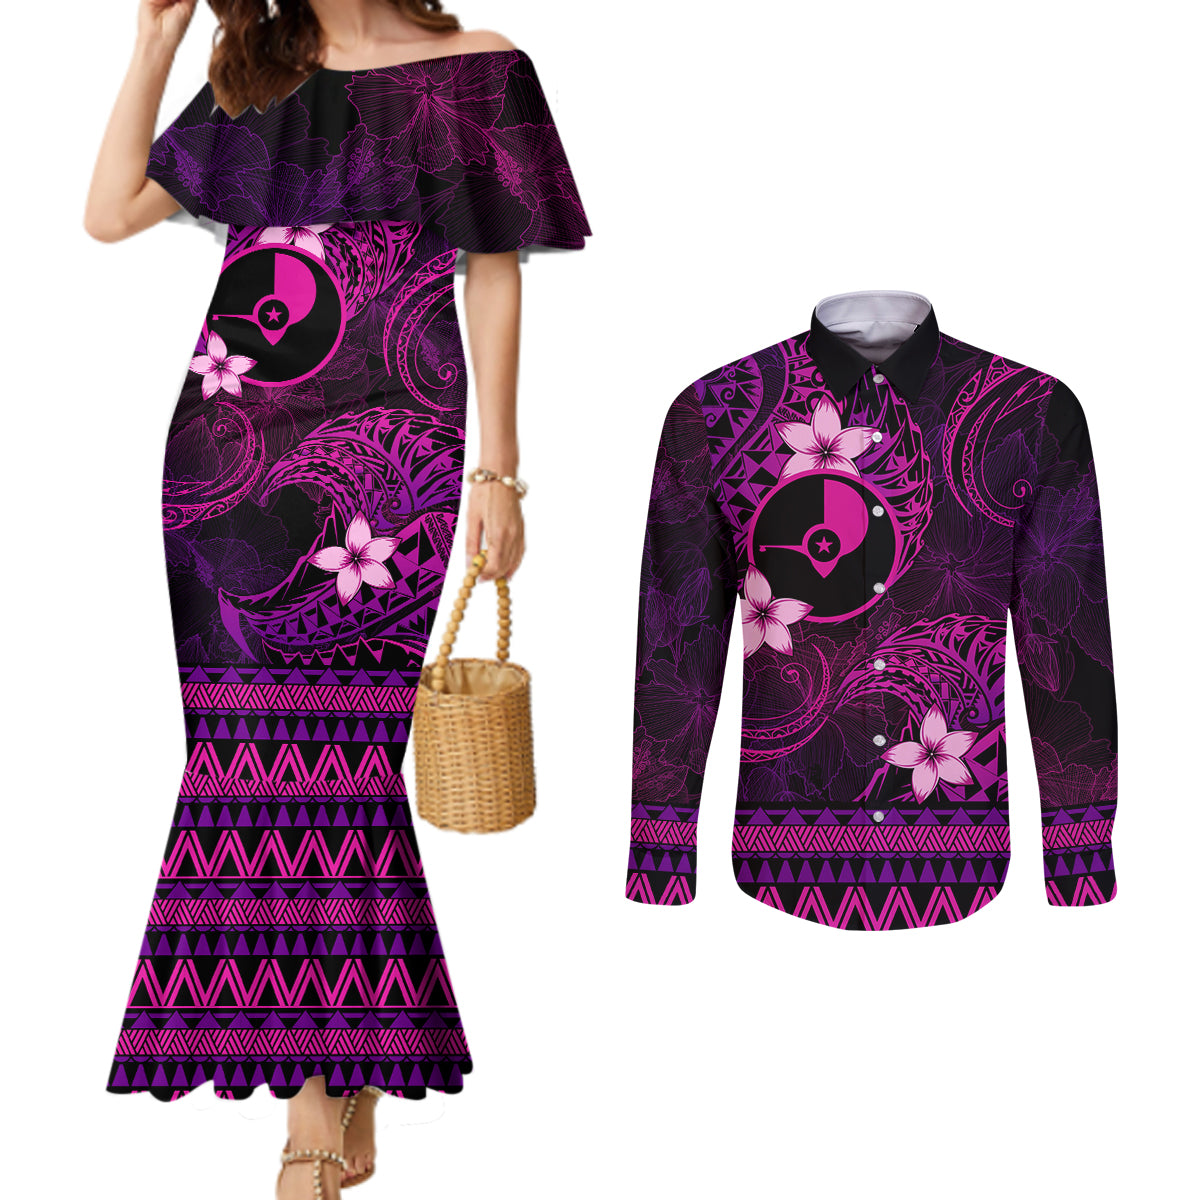 FSM Yap State Couples Matching Mermaid Dress and Long Sleeve Button Shirt Tribal Pattern Pink Version LT01 Pink - Polynesian Pride